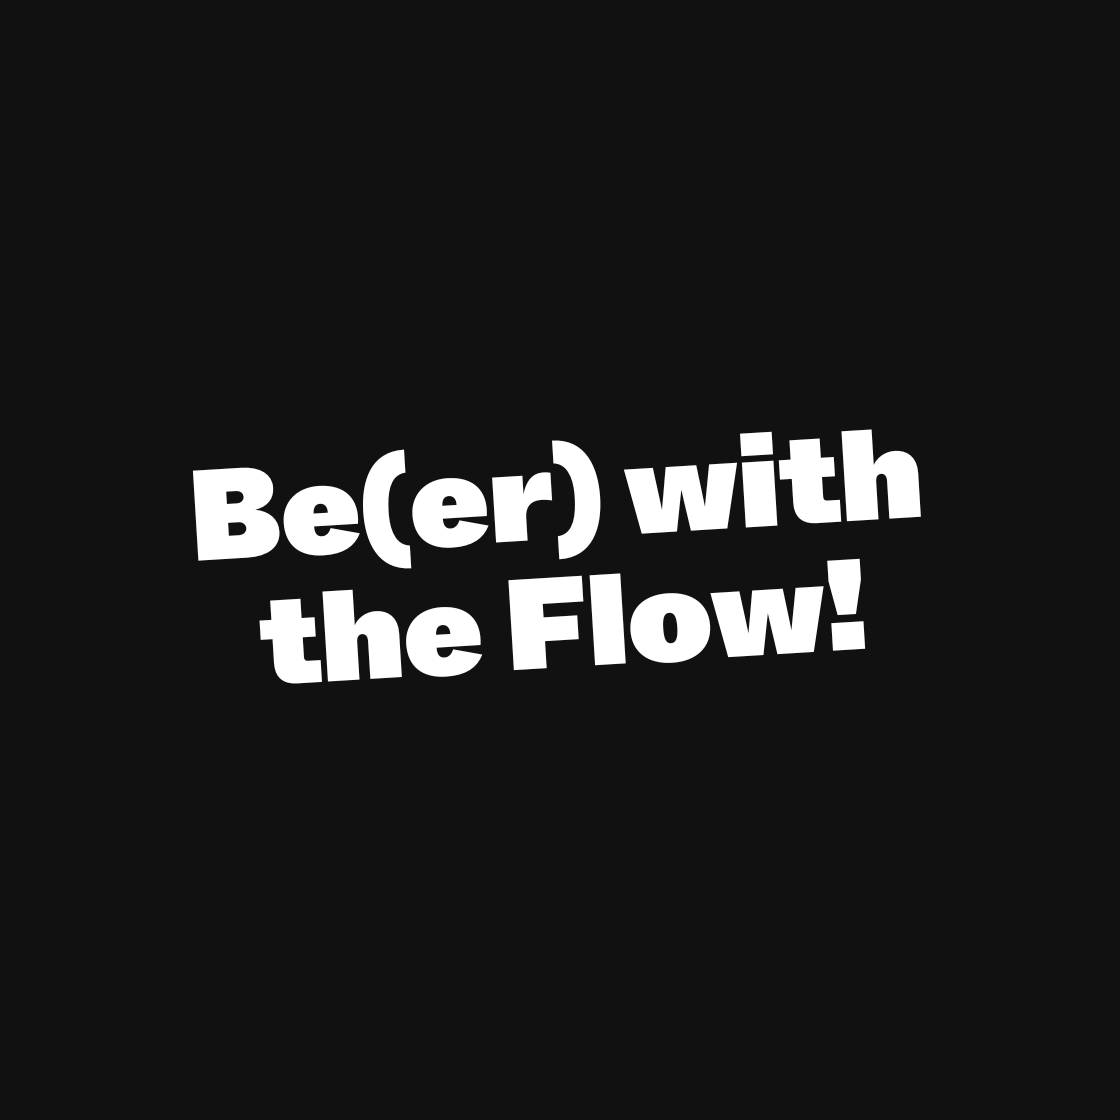 Be(er) with the Flow!